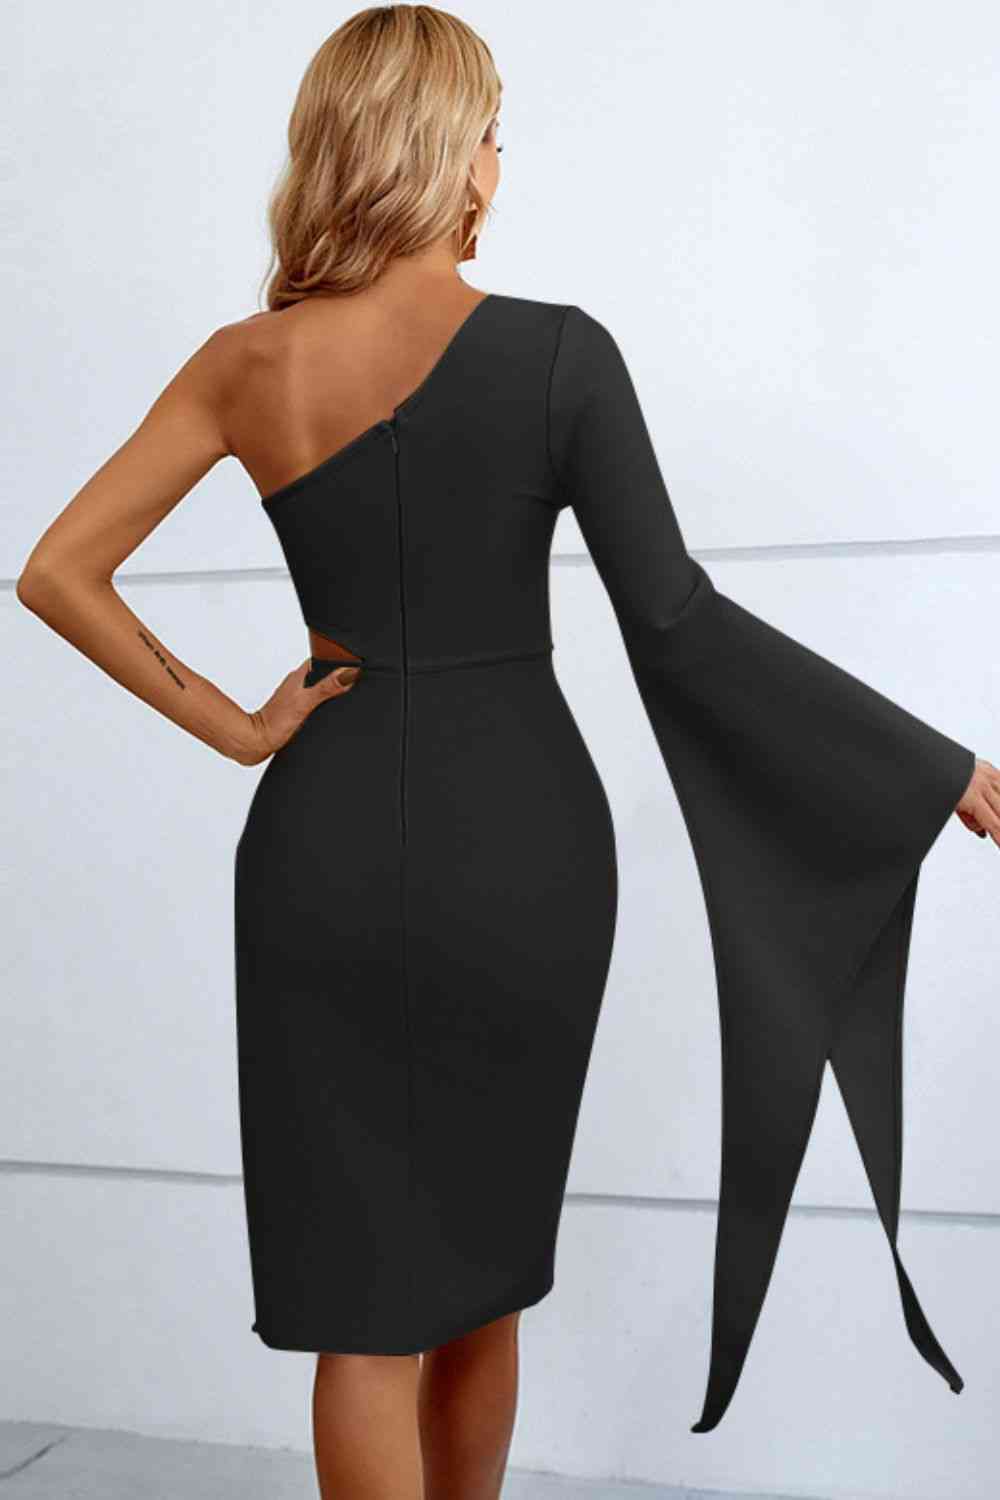 Different Page One-Shoulder Dress